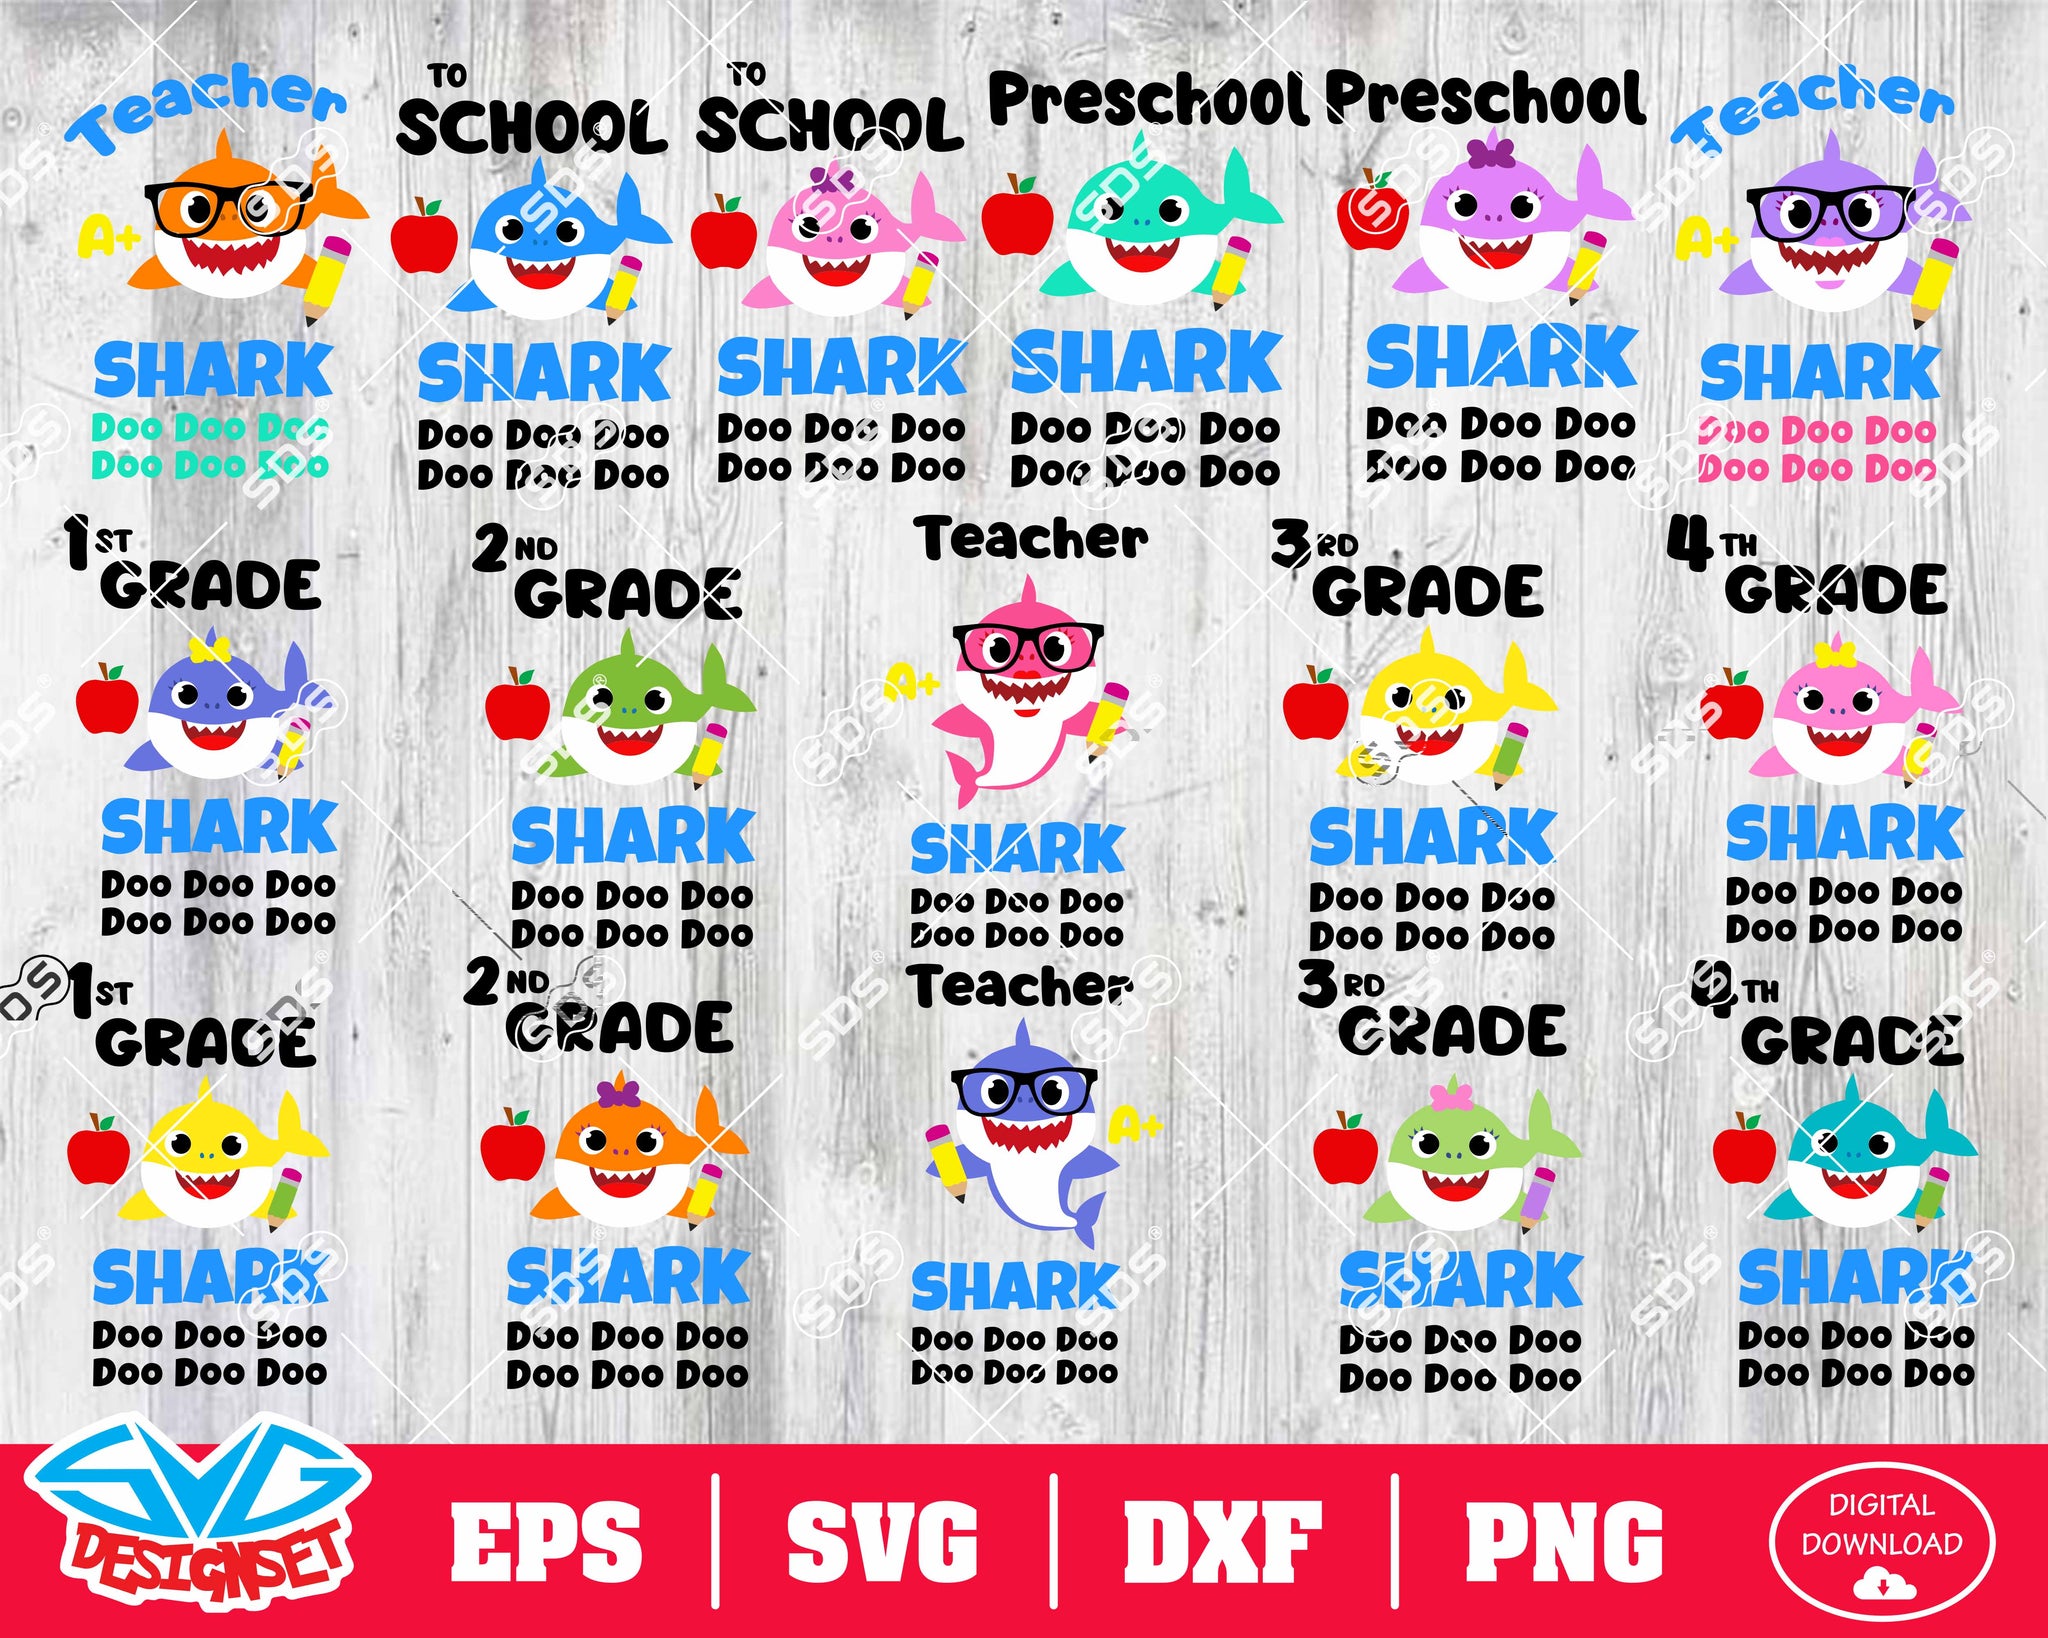 School Shark Bundle Svg, Dxf, Eps, Png, Clipart, Silhouette and Cutfiles - SVGDesignSets